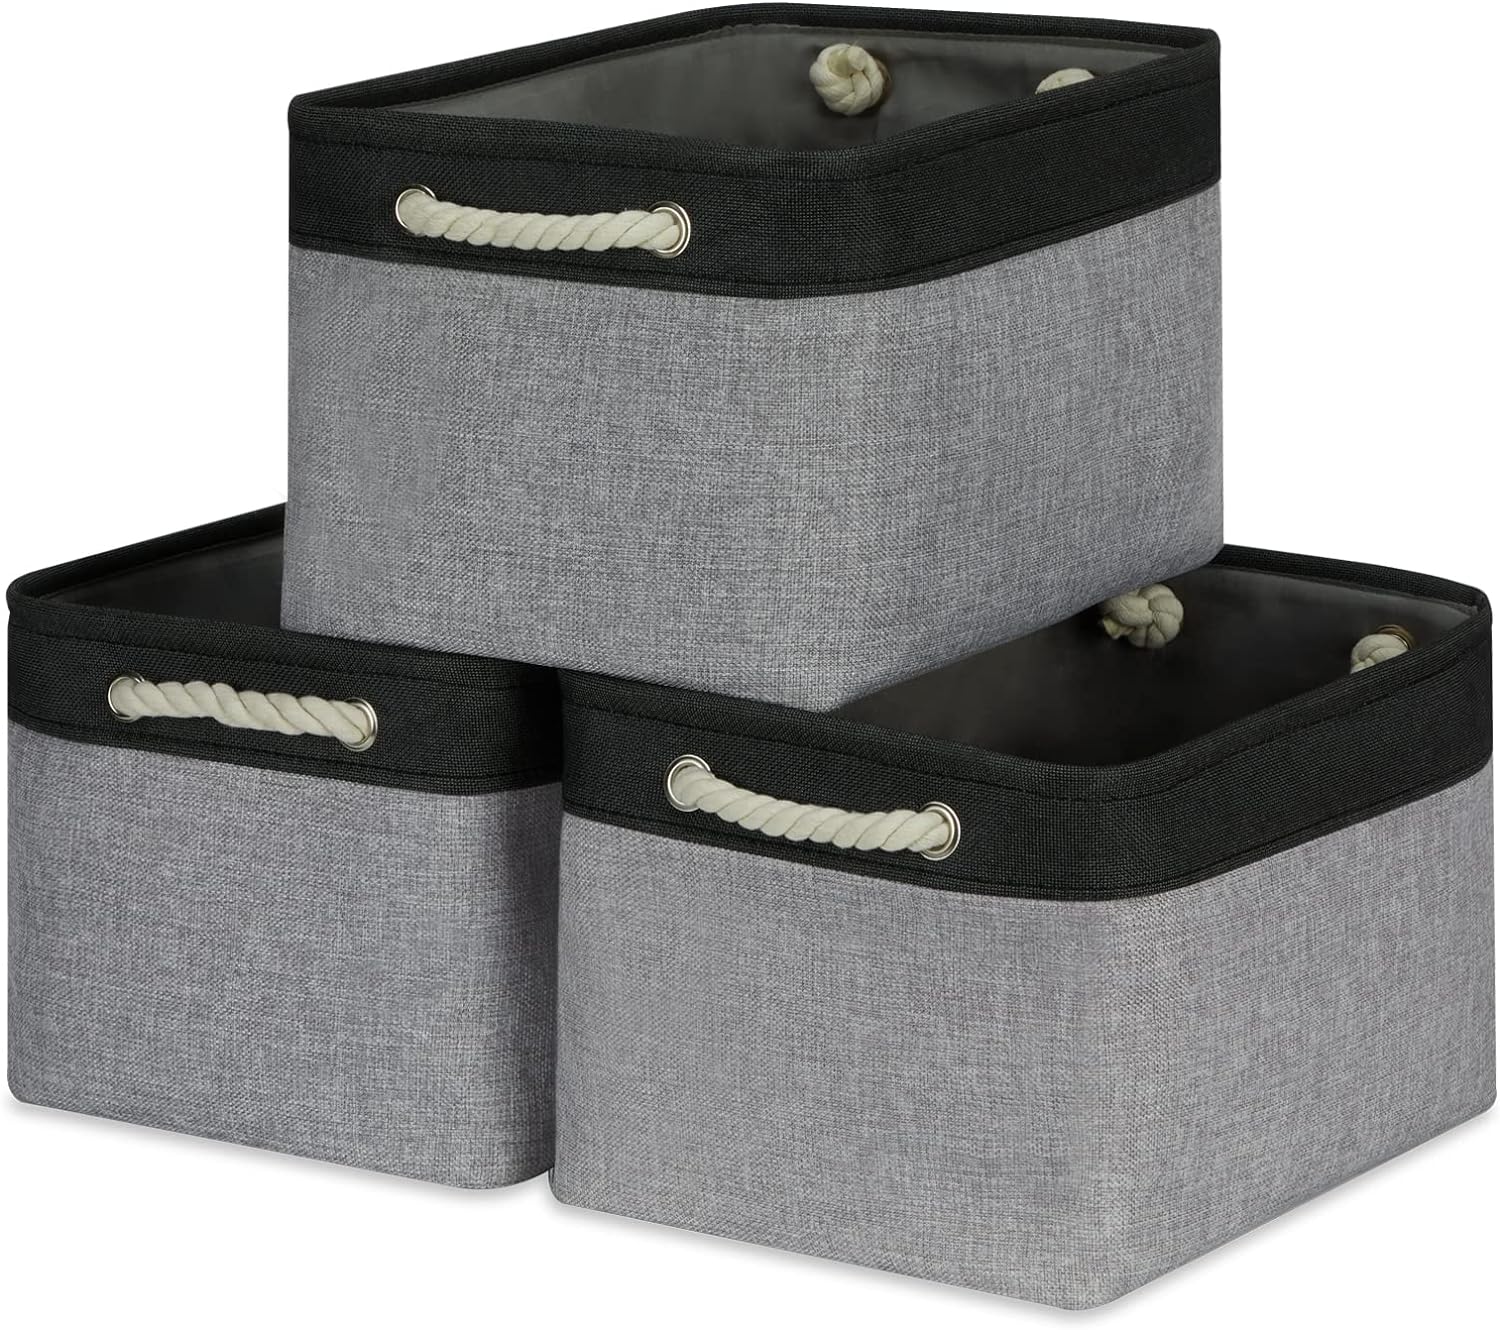 Temary Canvas Storage Baskets for Shelves, 3 Pcs Empty Gift Baskets for Organizing Clothes, Fabric Storage Bins with Rope Handles for Home (Black&Grey,15Lx11Wx9.5H Inches)